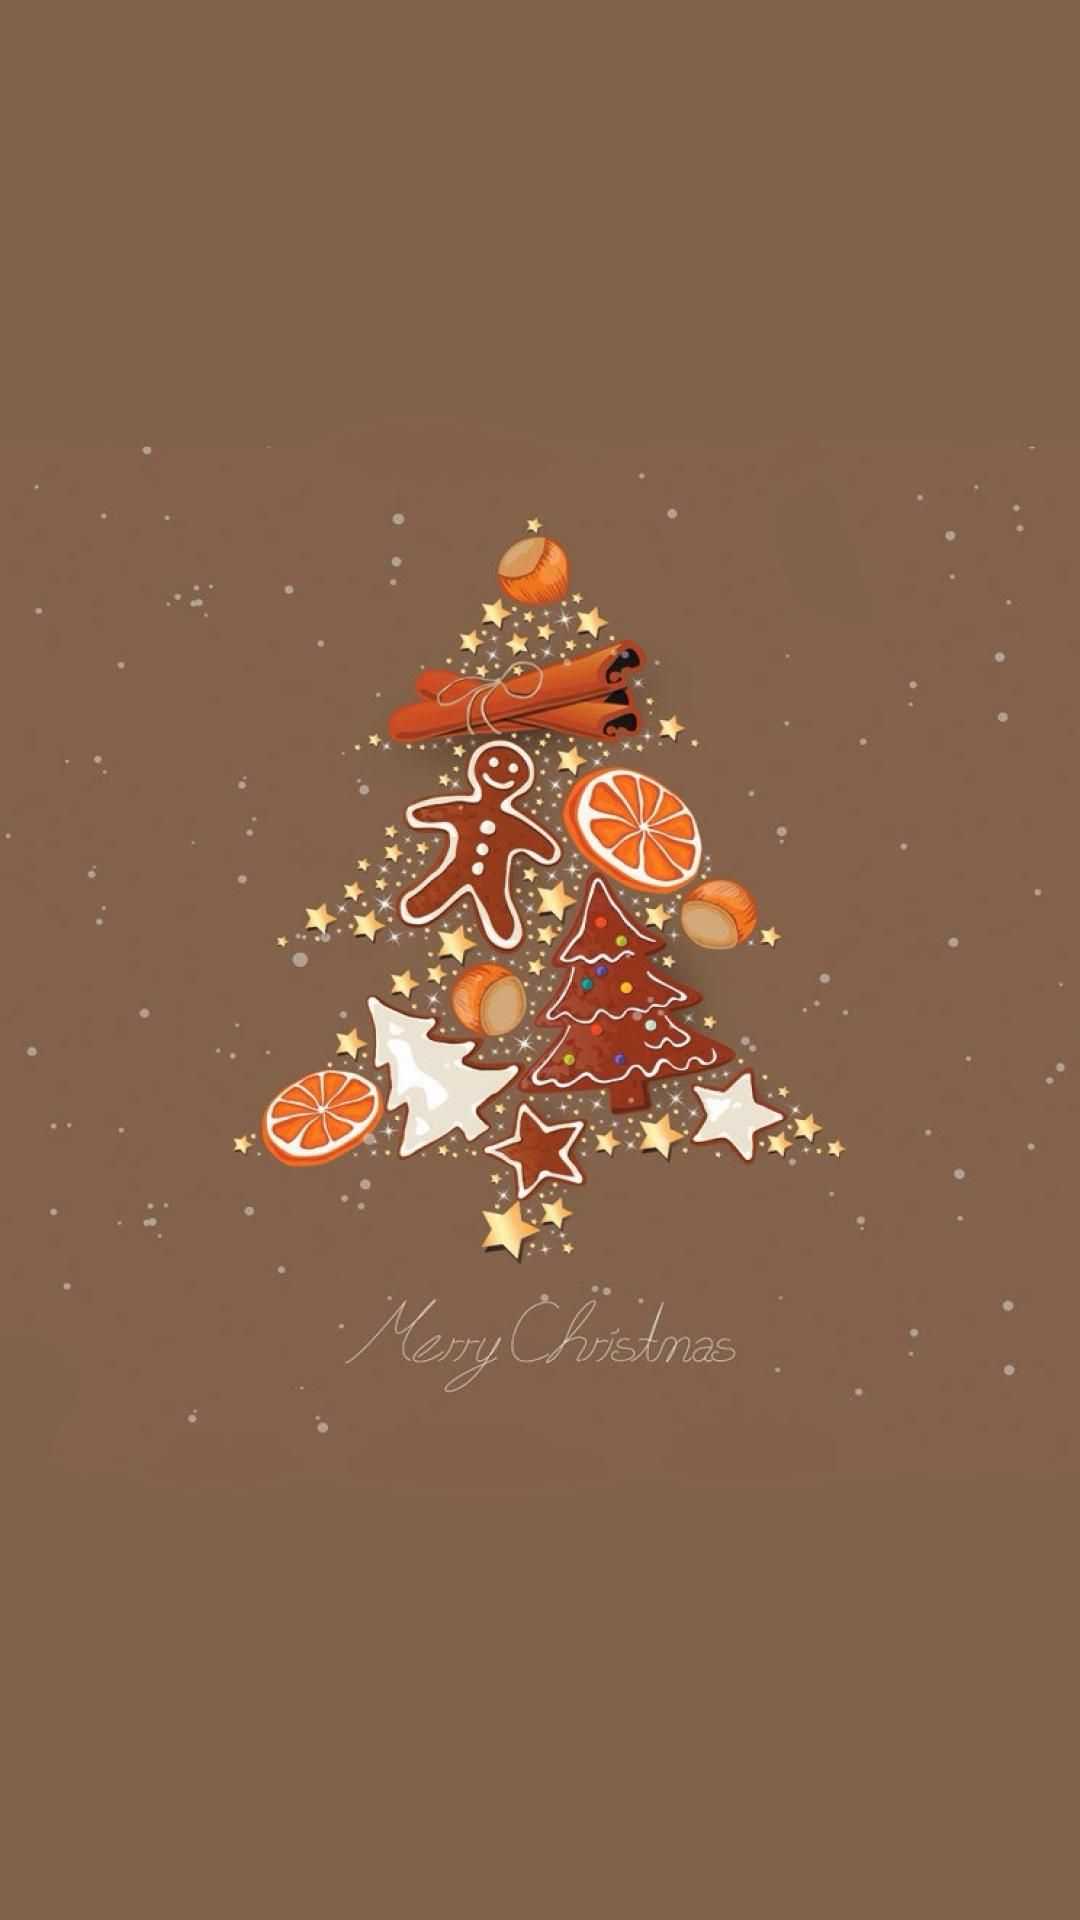 Get the Latest HD Christmas Wallpapers For Free